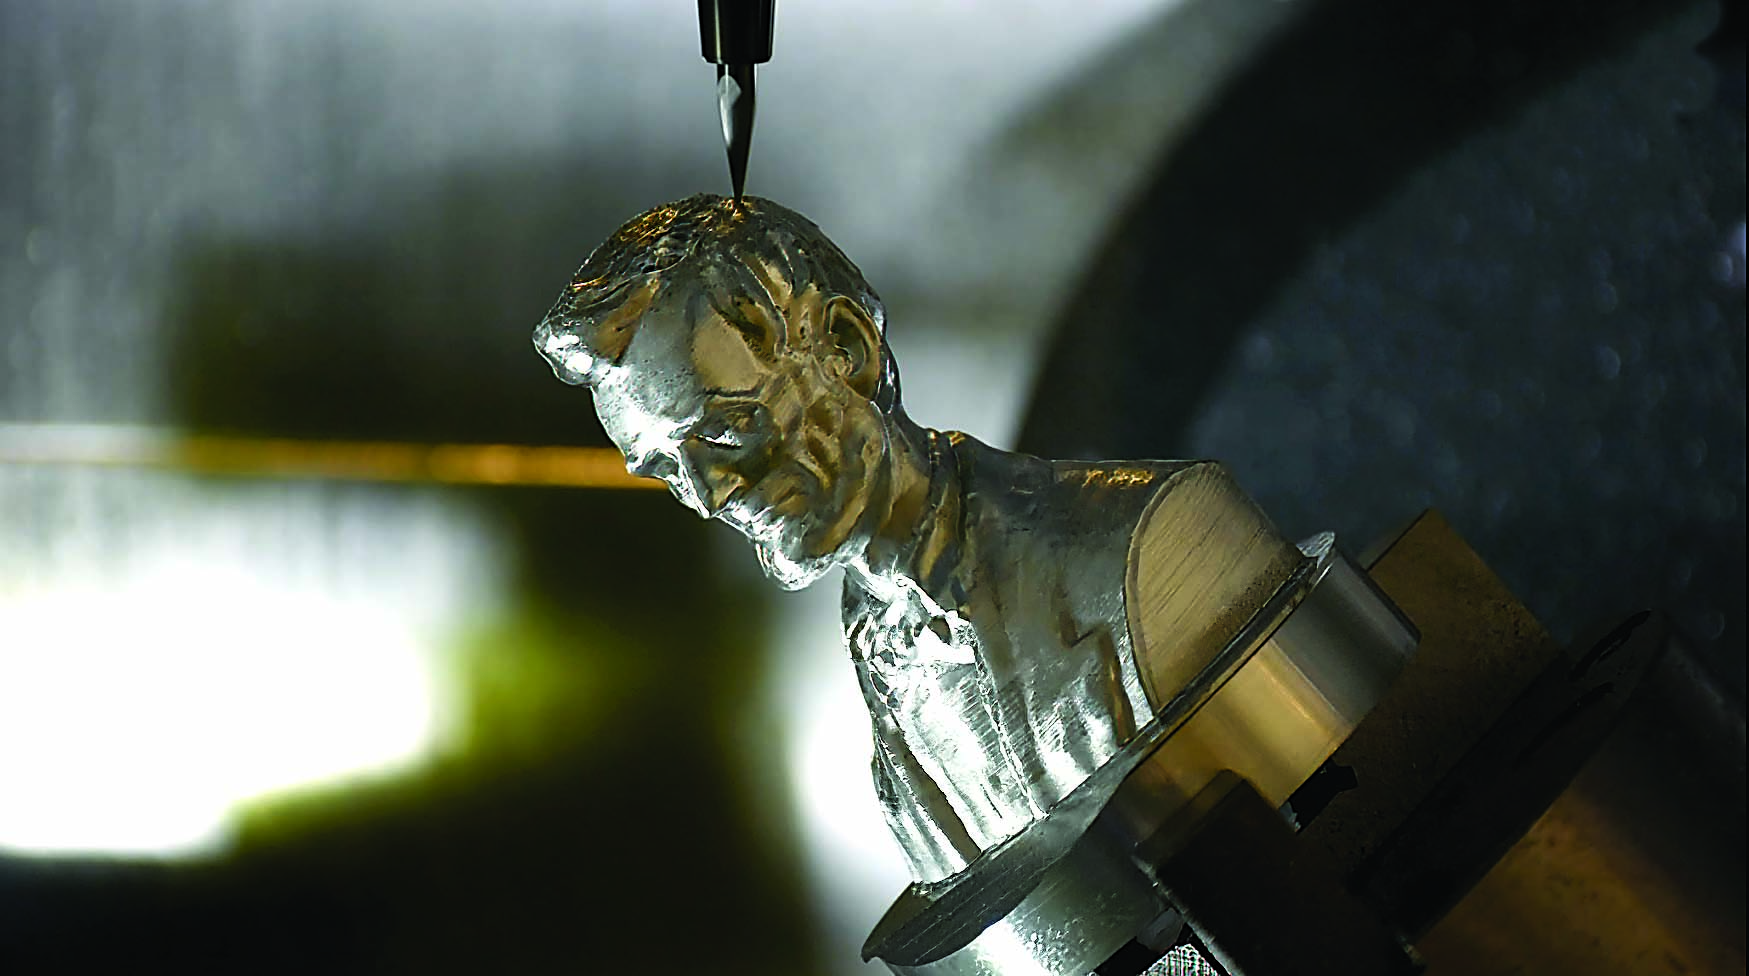 The resulting part shows the bust of Abraham Lincoln after machining using Mastercam’s mesh editing and toolpaths.